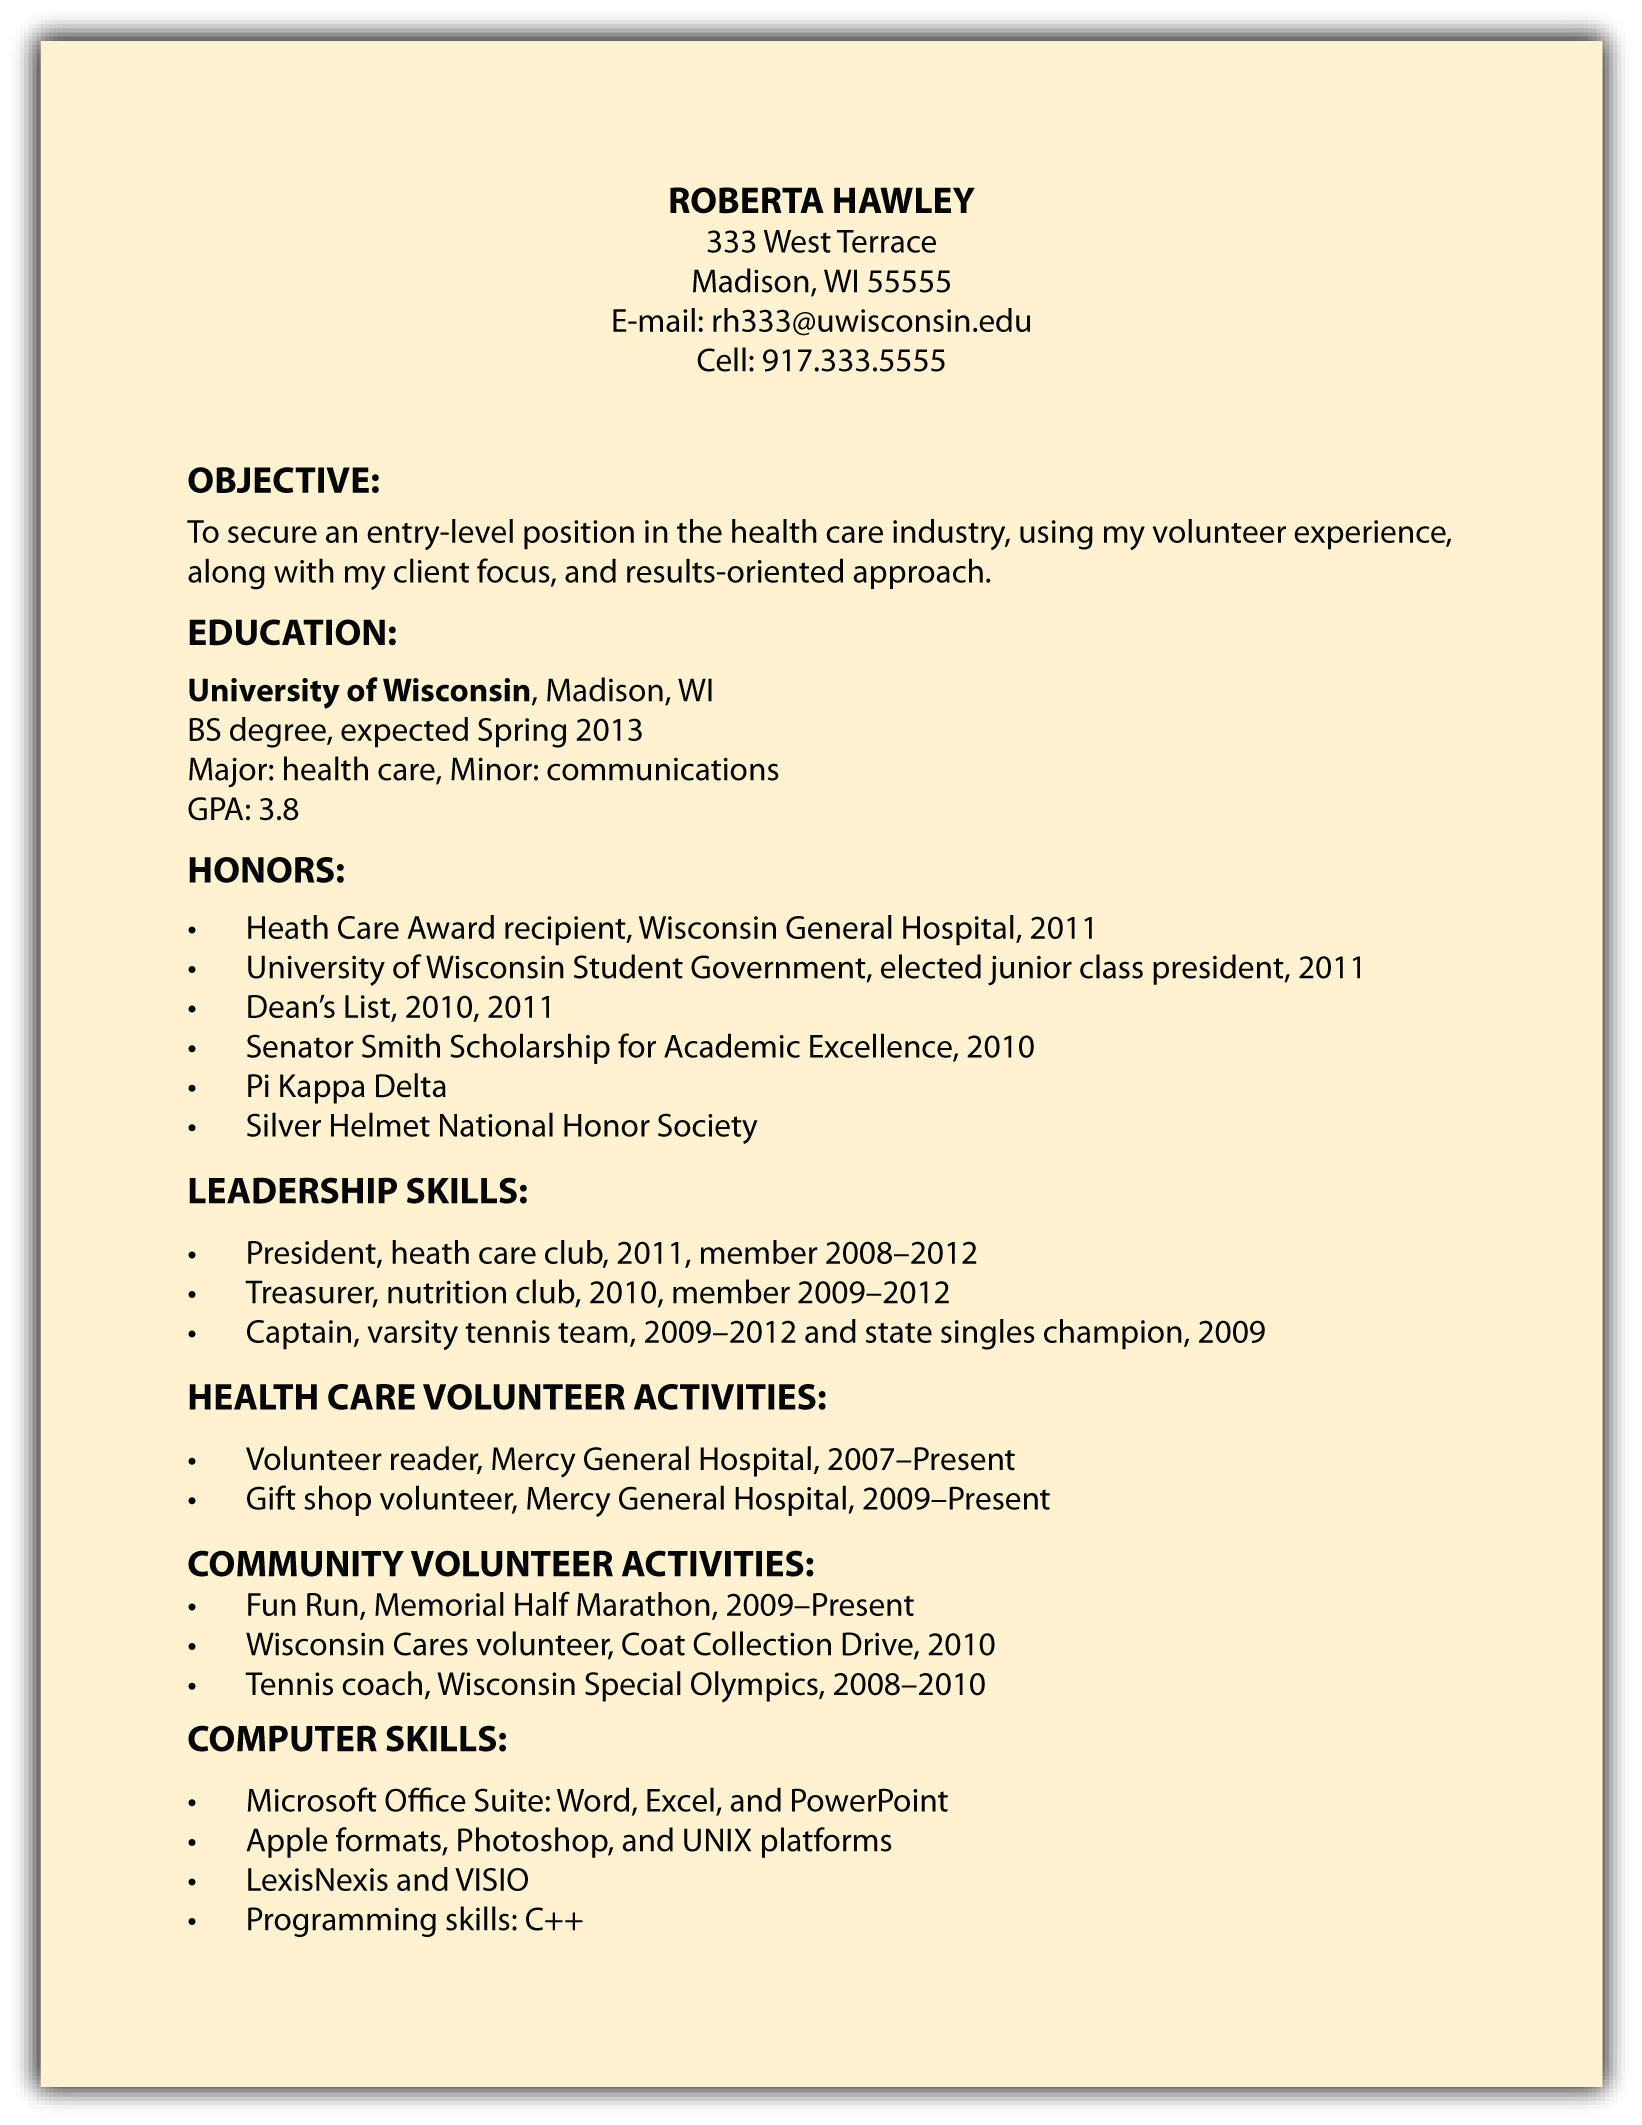 Functional Resume Template for College Student Other RÃ©sumÃ© formats, Including Functional RÃ©sumÃ©s